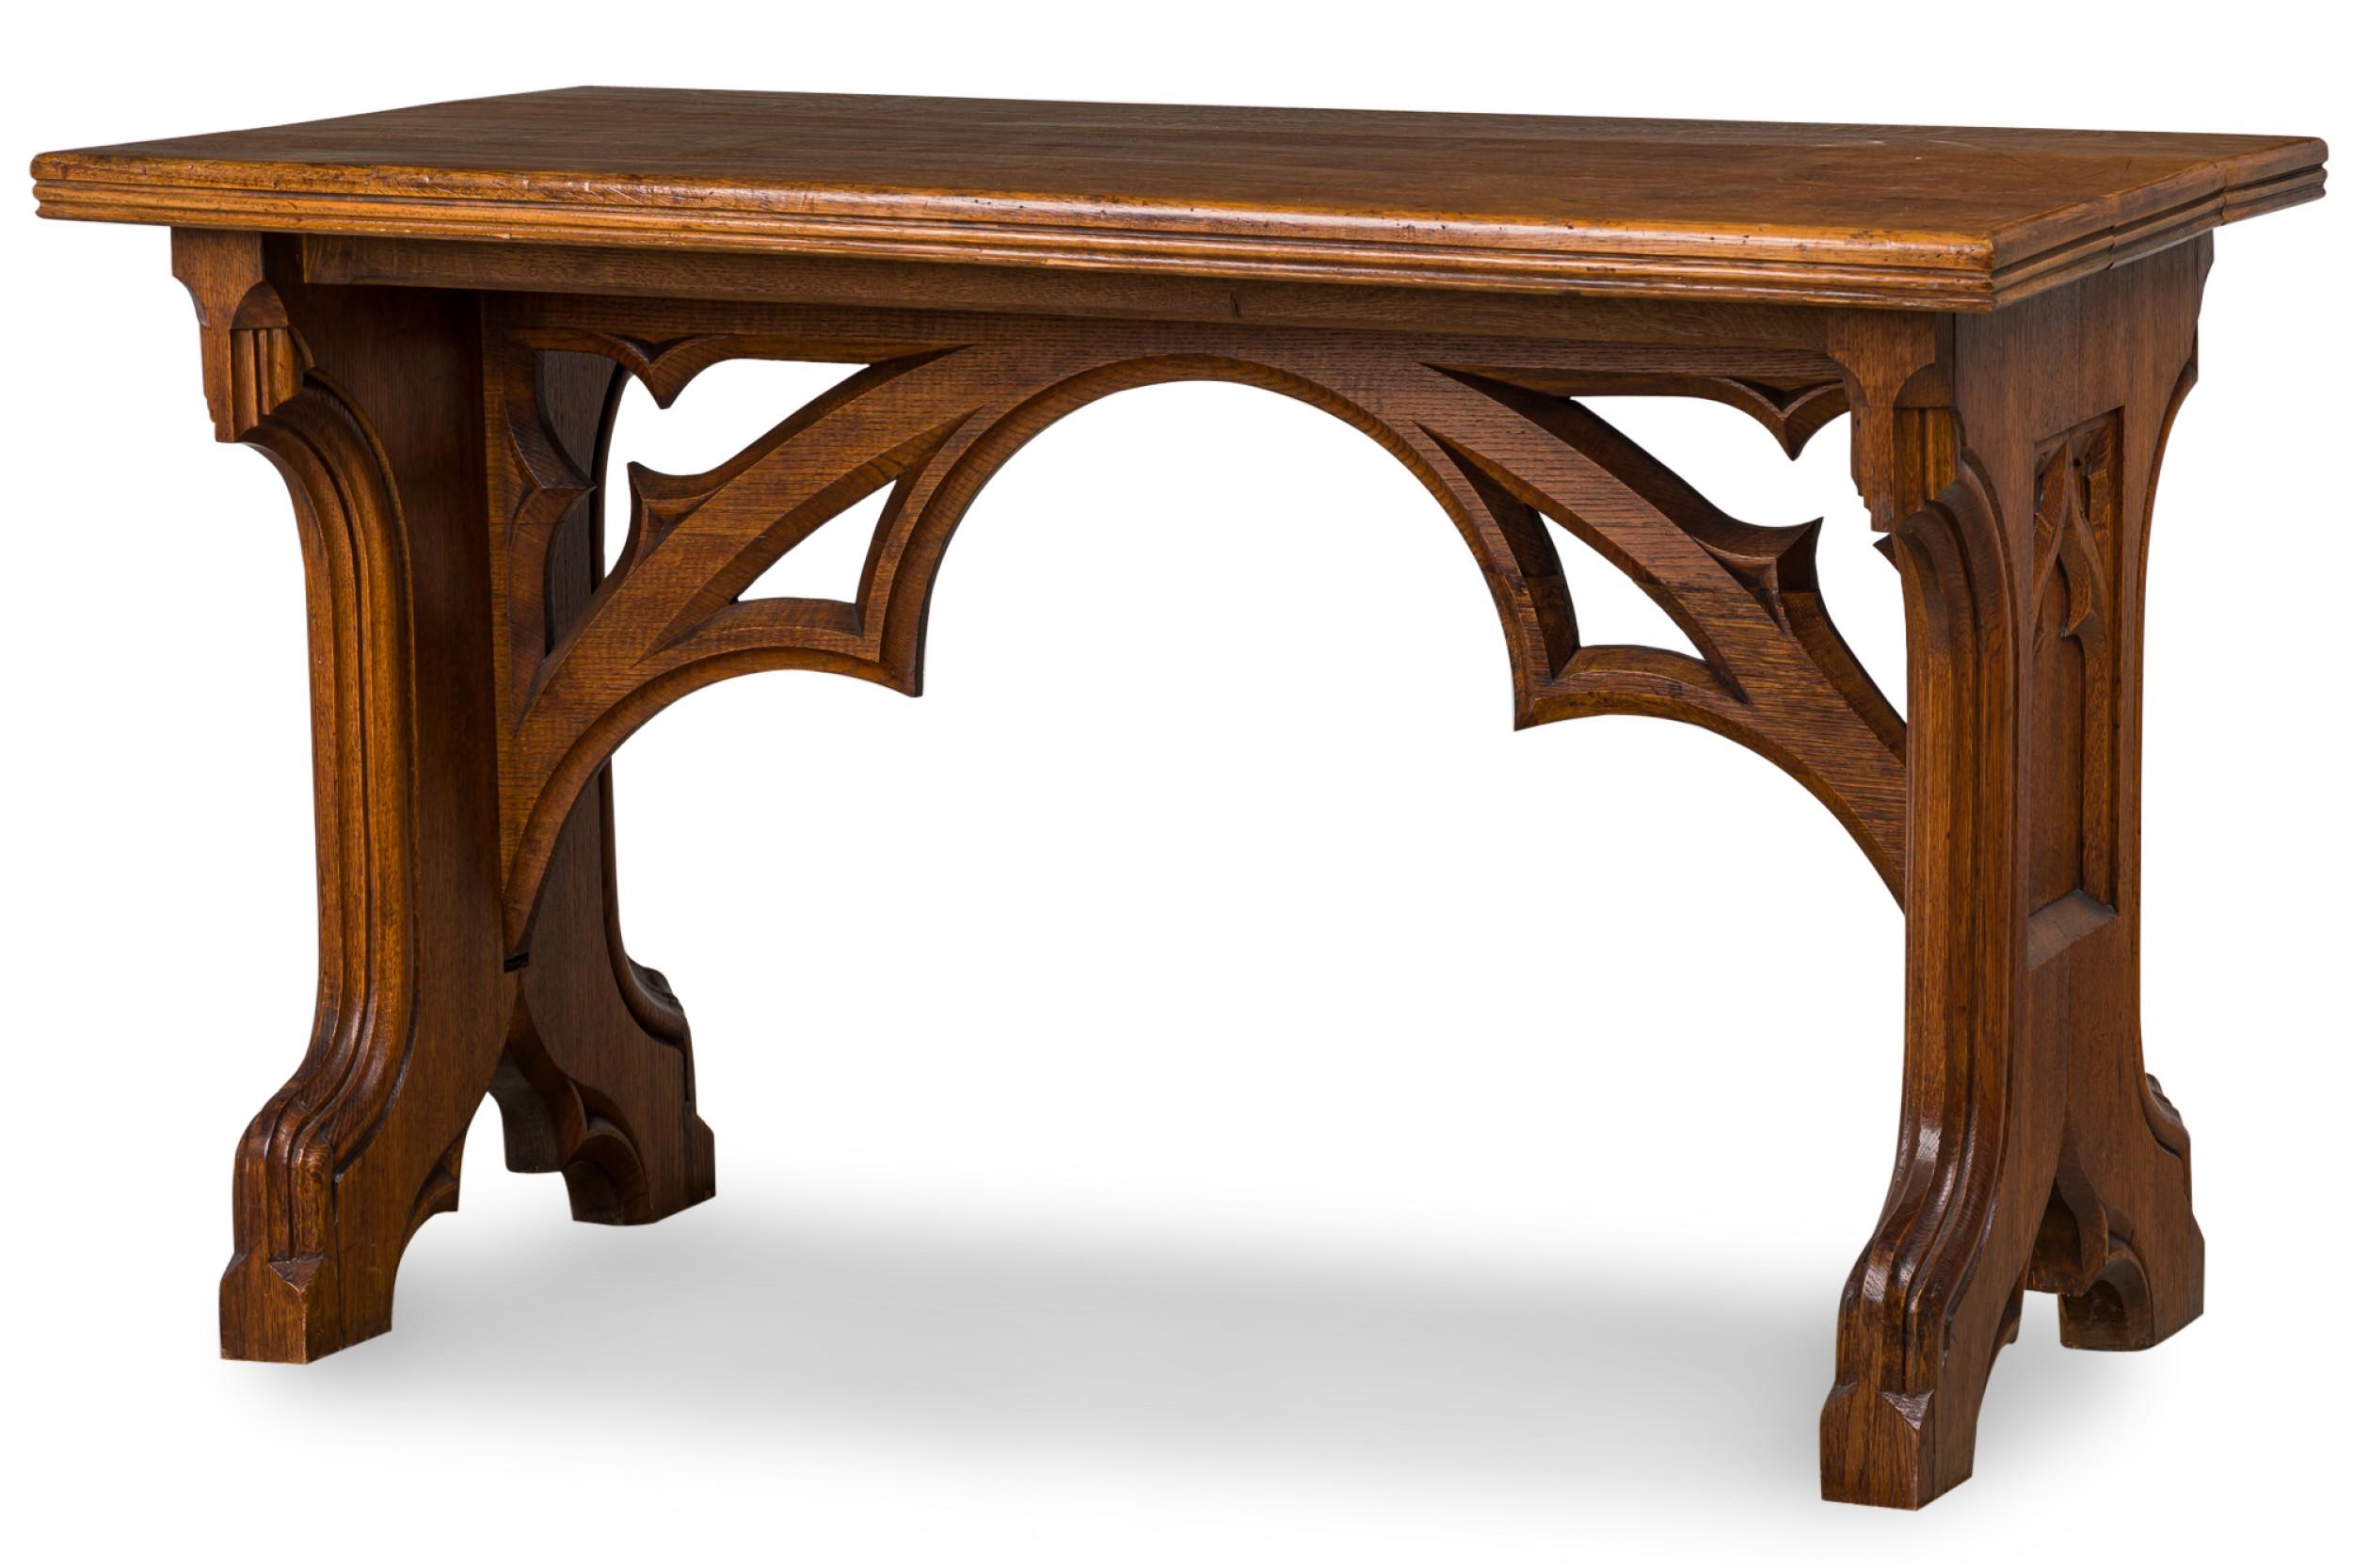 English Victorian Gothic Revival (late 19th Century) carved oak rectangular table resting on two wide carved legs connected at center under the tabletop by two arching carved open supports.